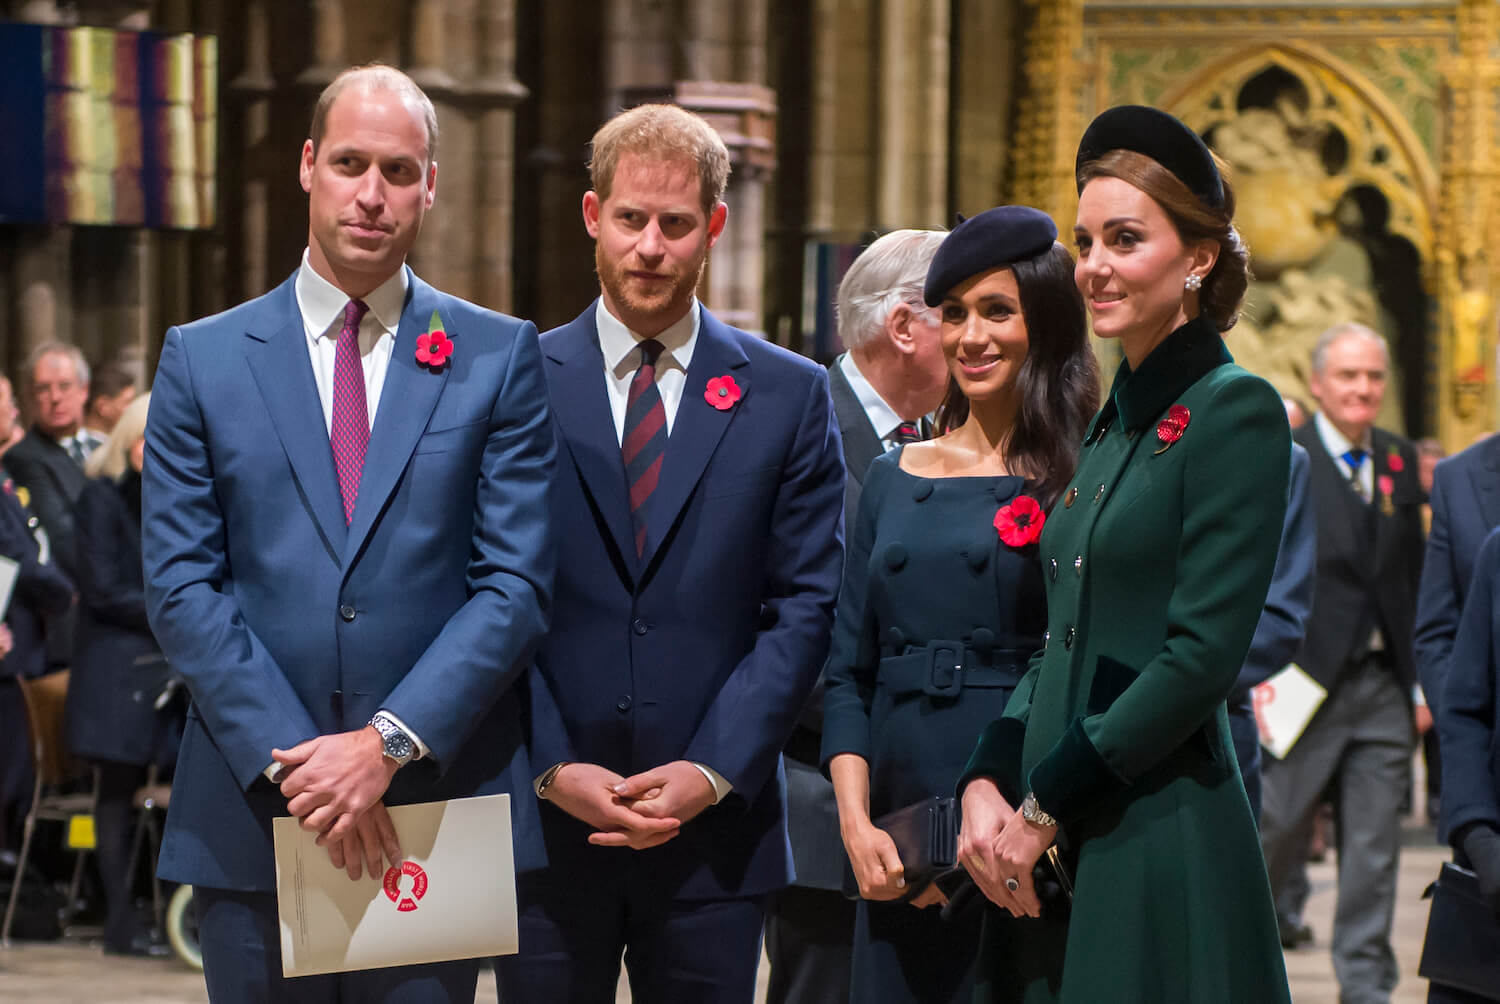 Body Language Expert Says Meghan Markle and Prince William Didn’t Display Any Warmth Toward Each Other